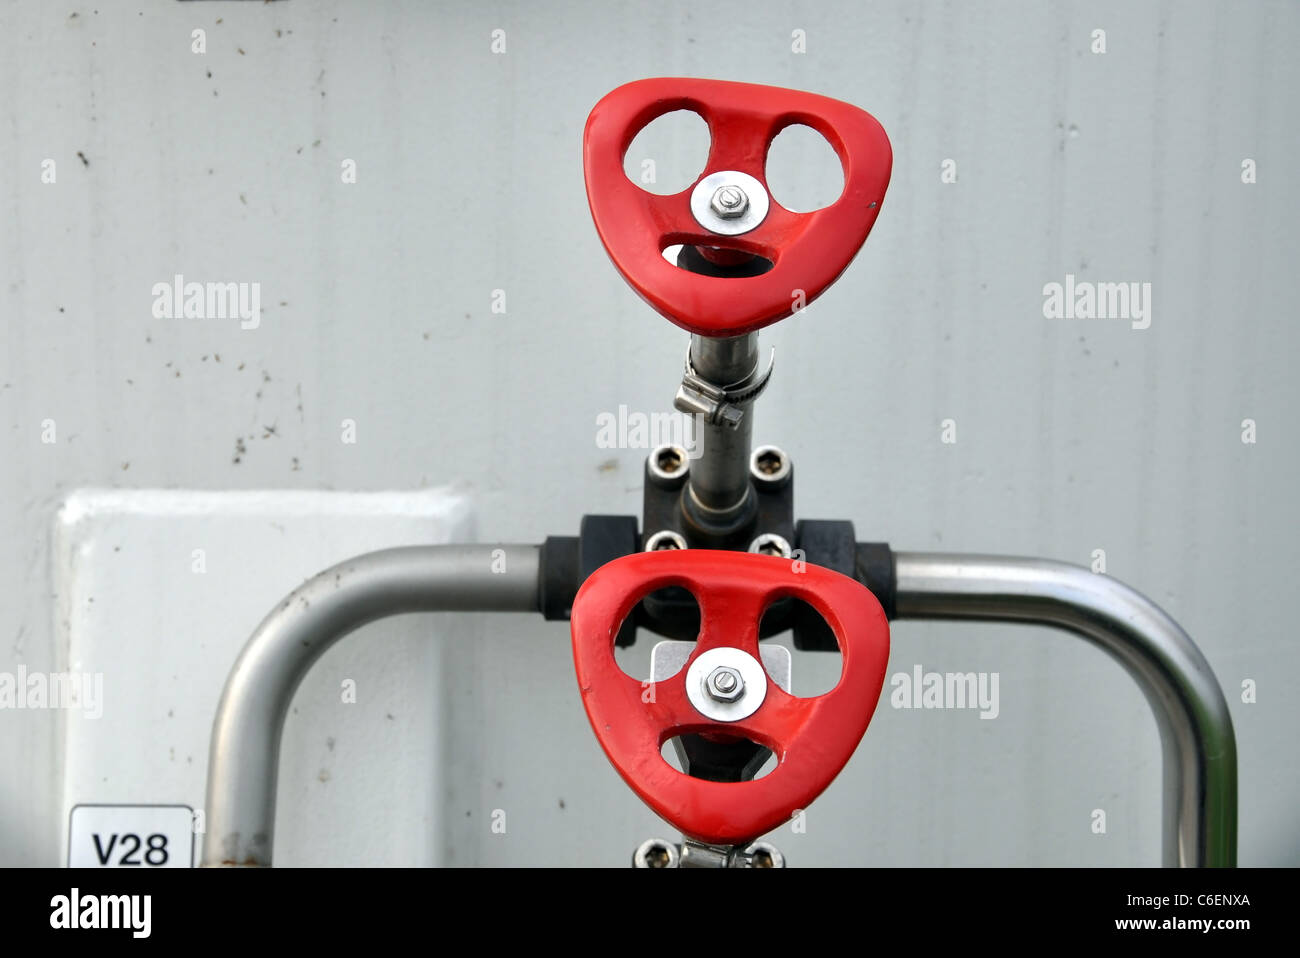 Red handles on valves of the pipeline Stock Photo